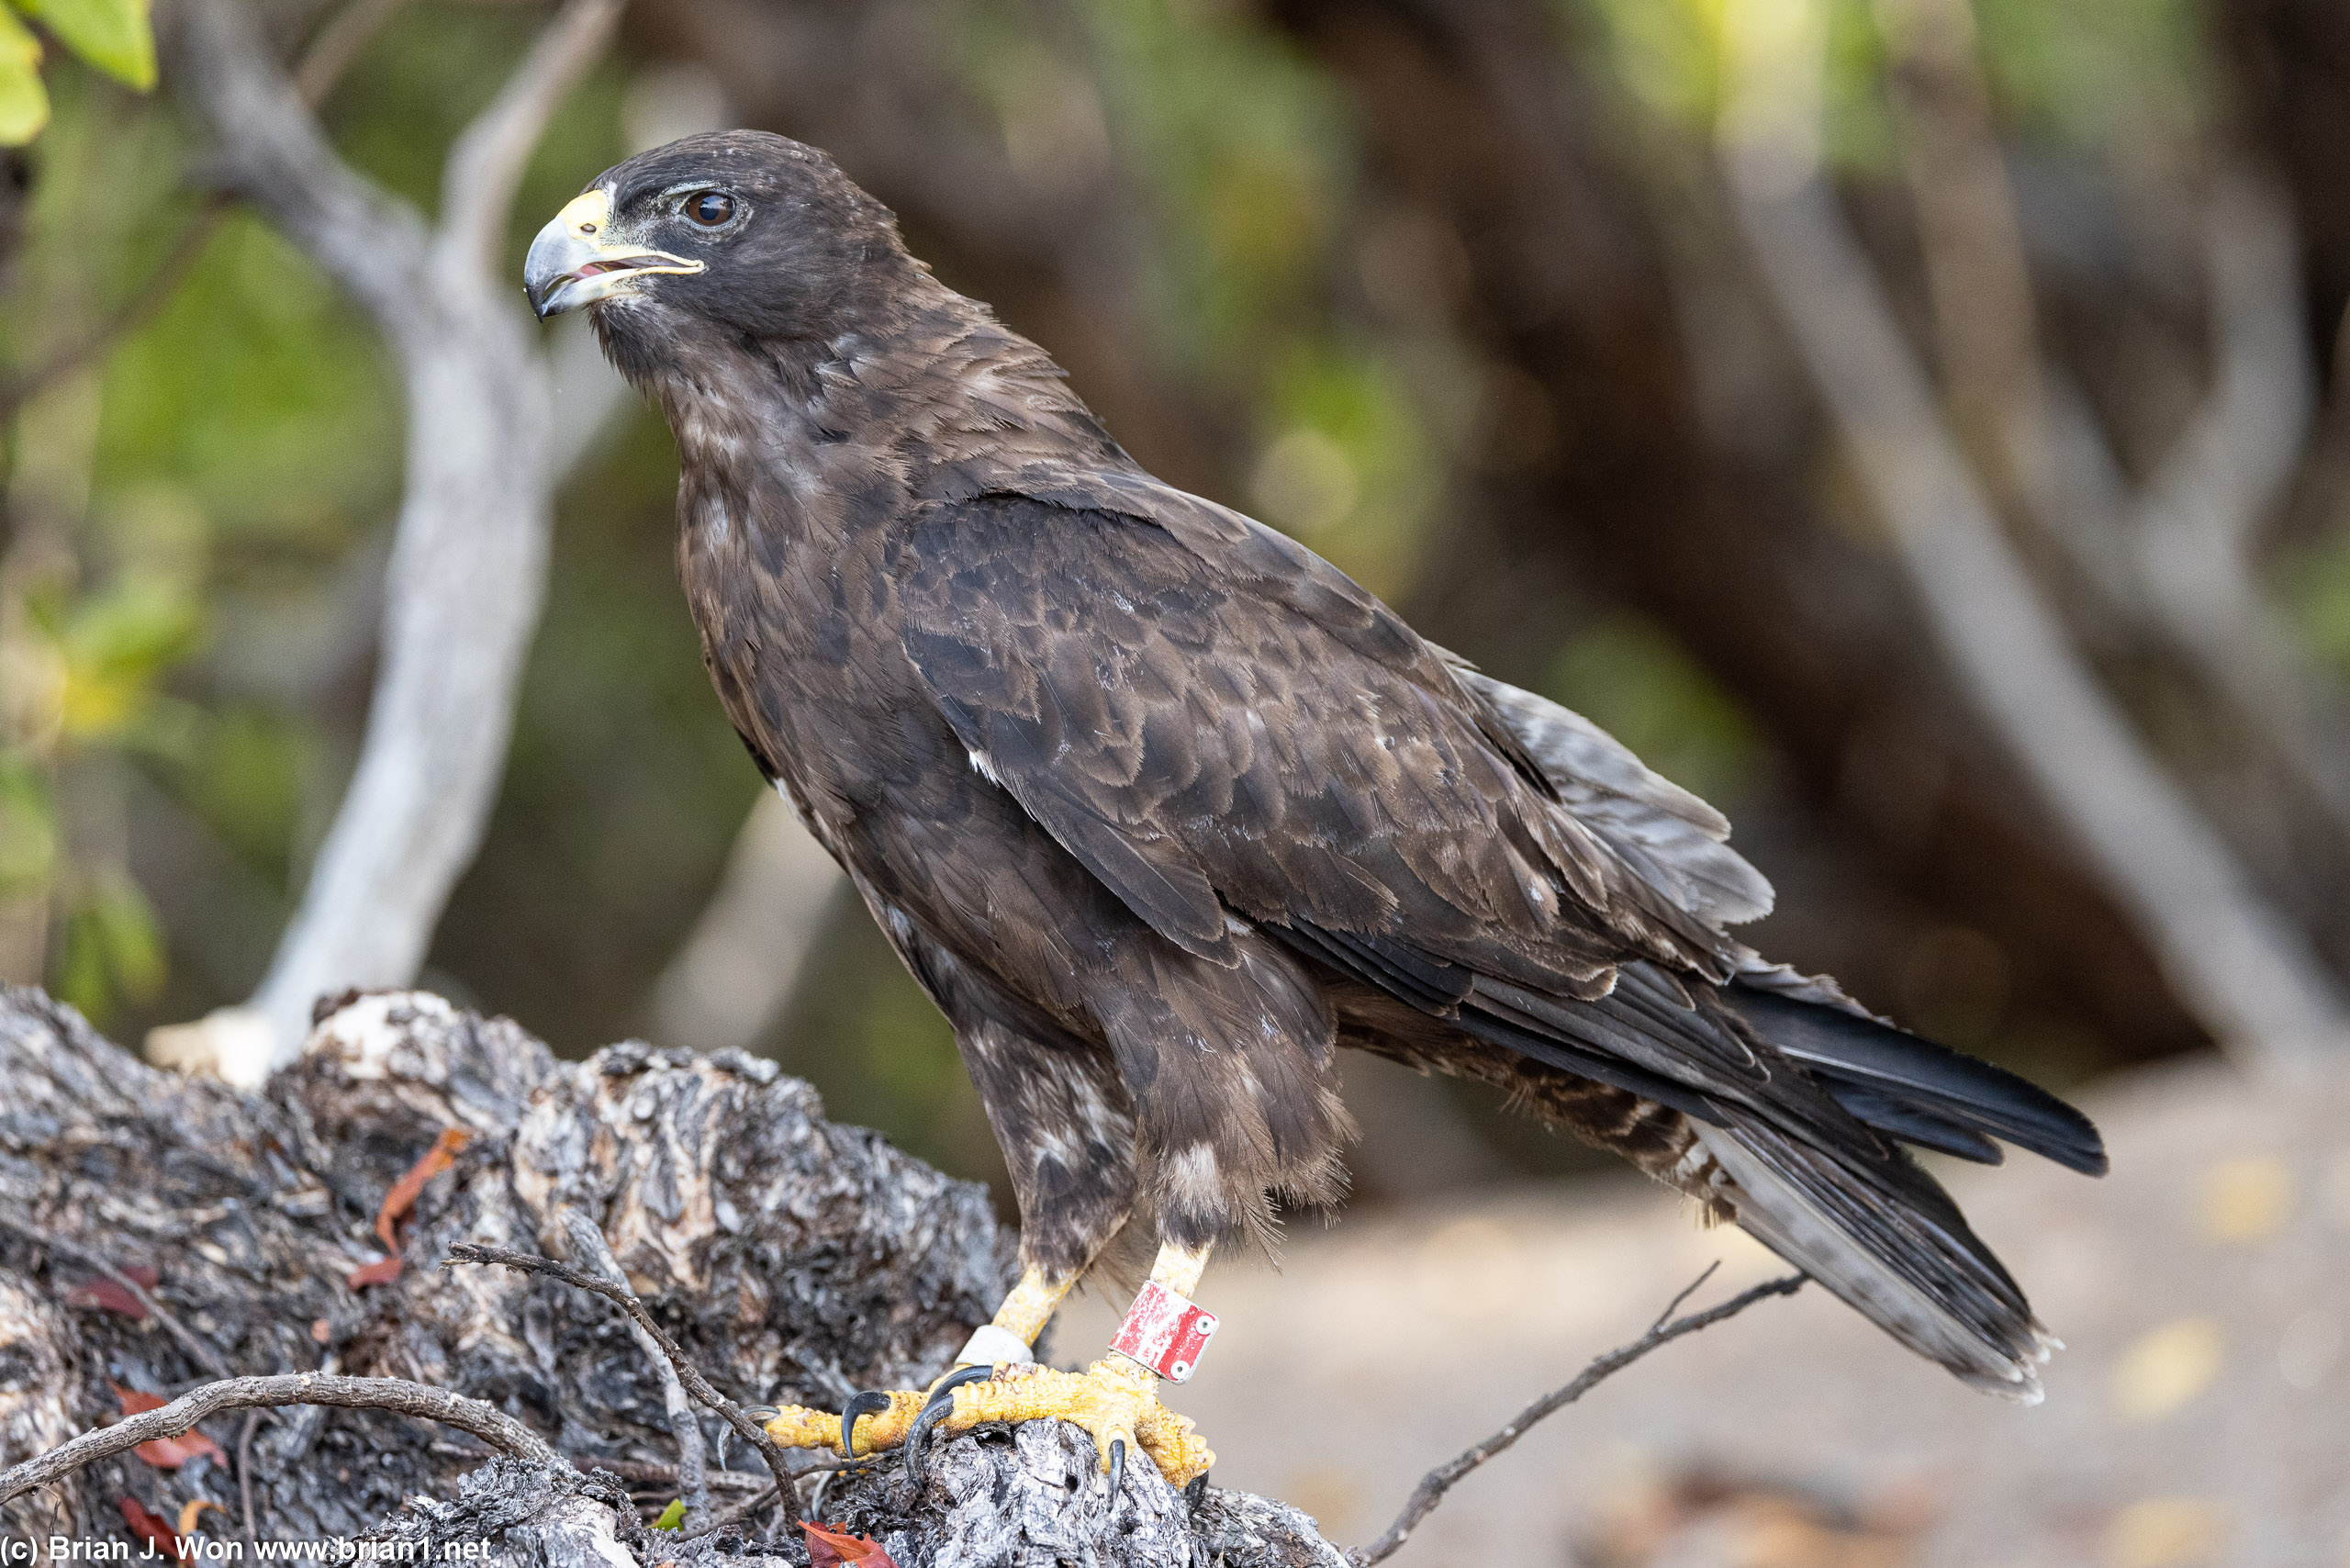 Galapagos hawk. There was a juvenile as well that I missed.